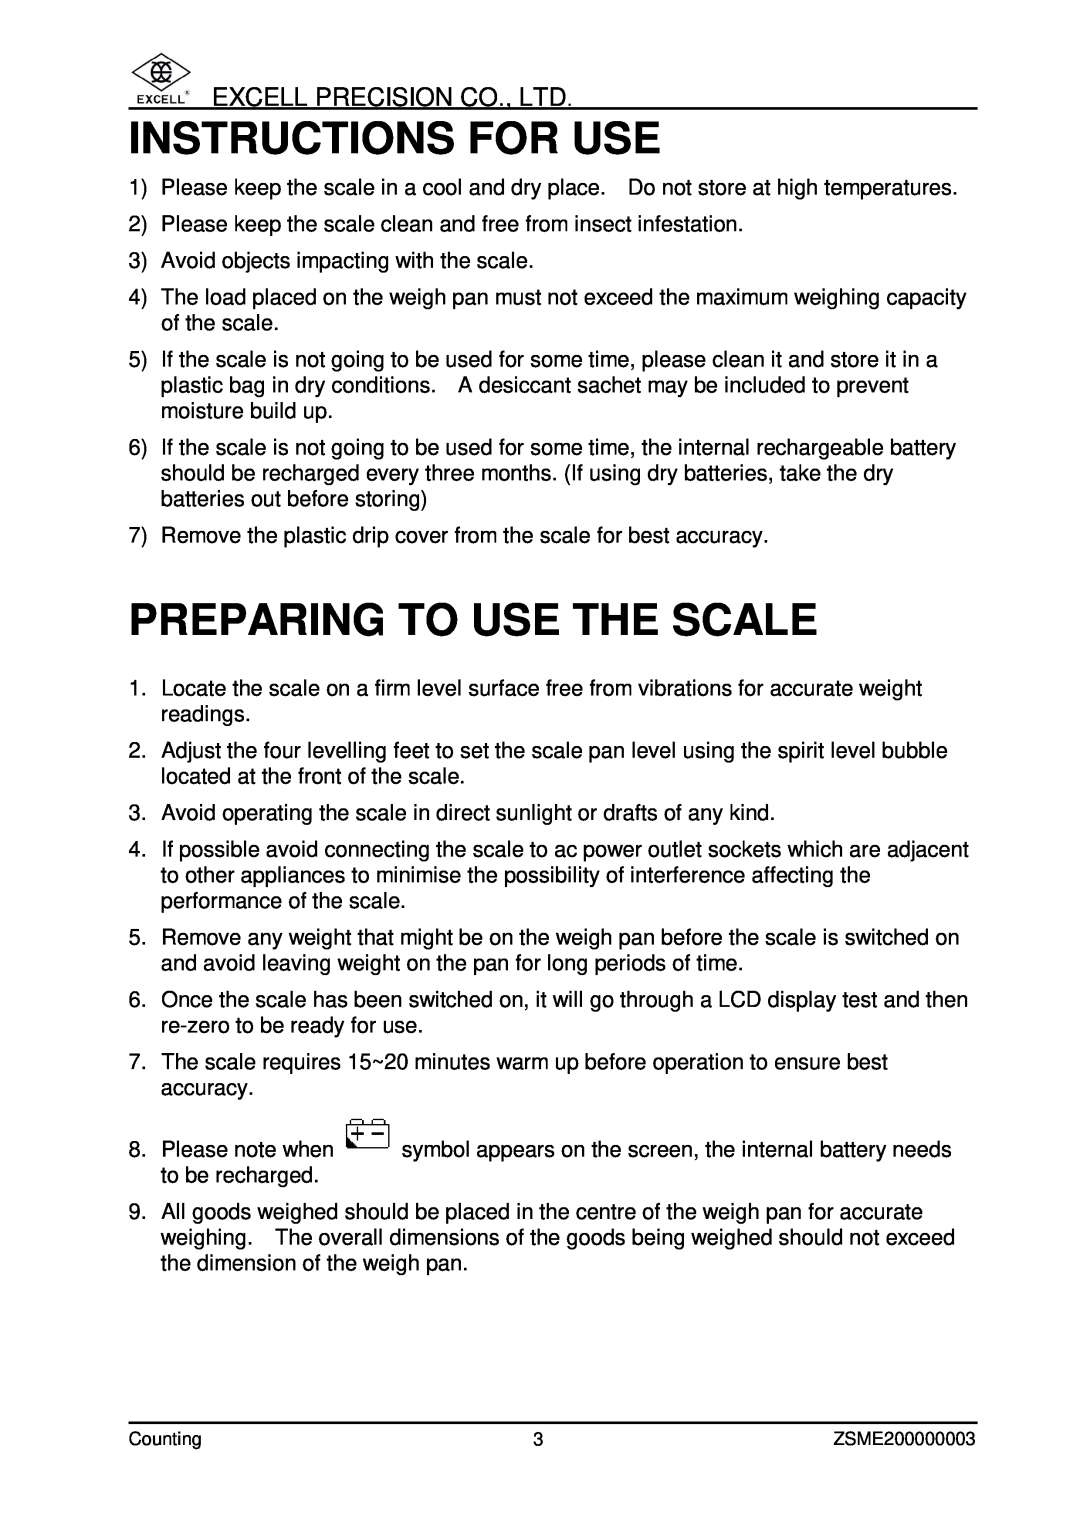 Excell Precision Counting Scale user manual Instructions For Use, Preparing To Use The Scale 